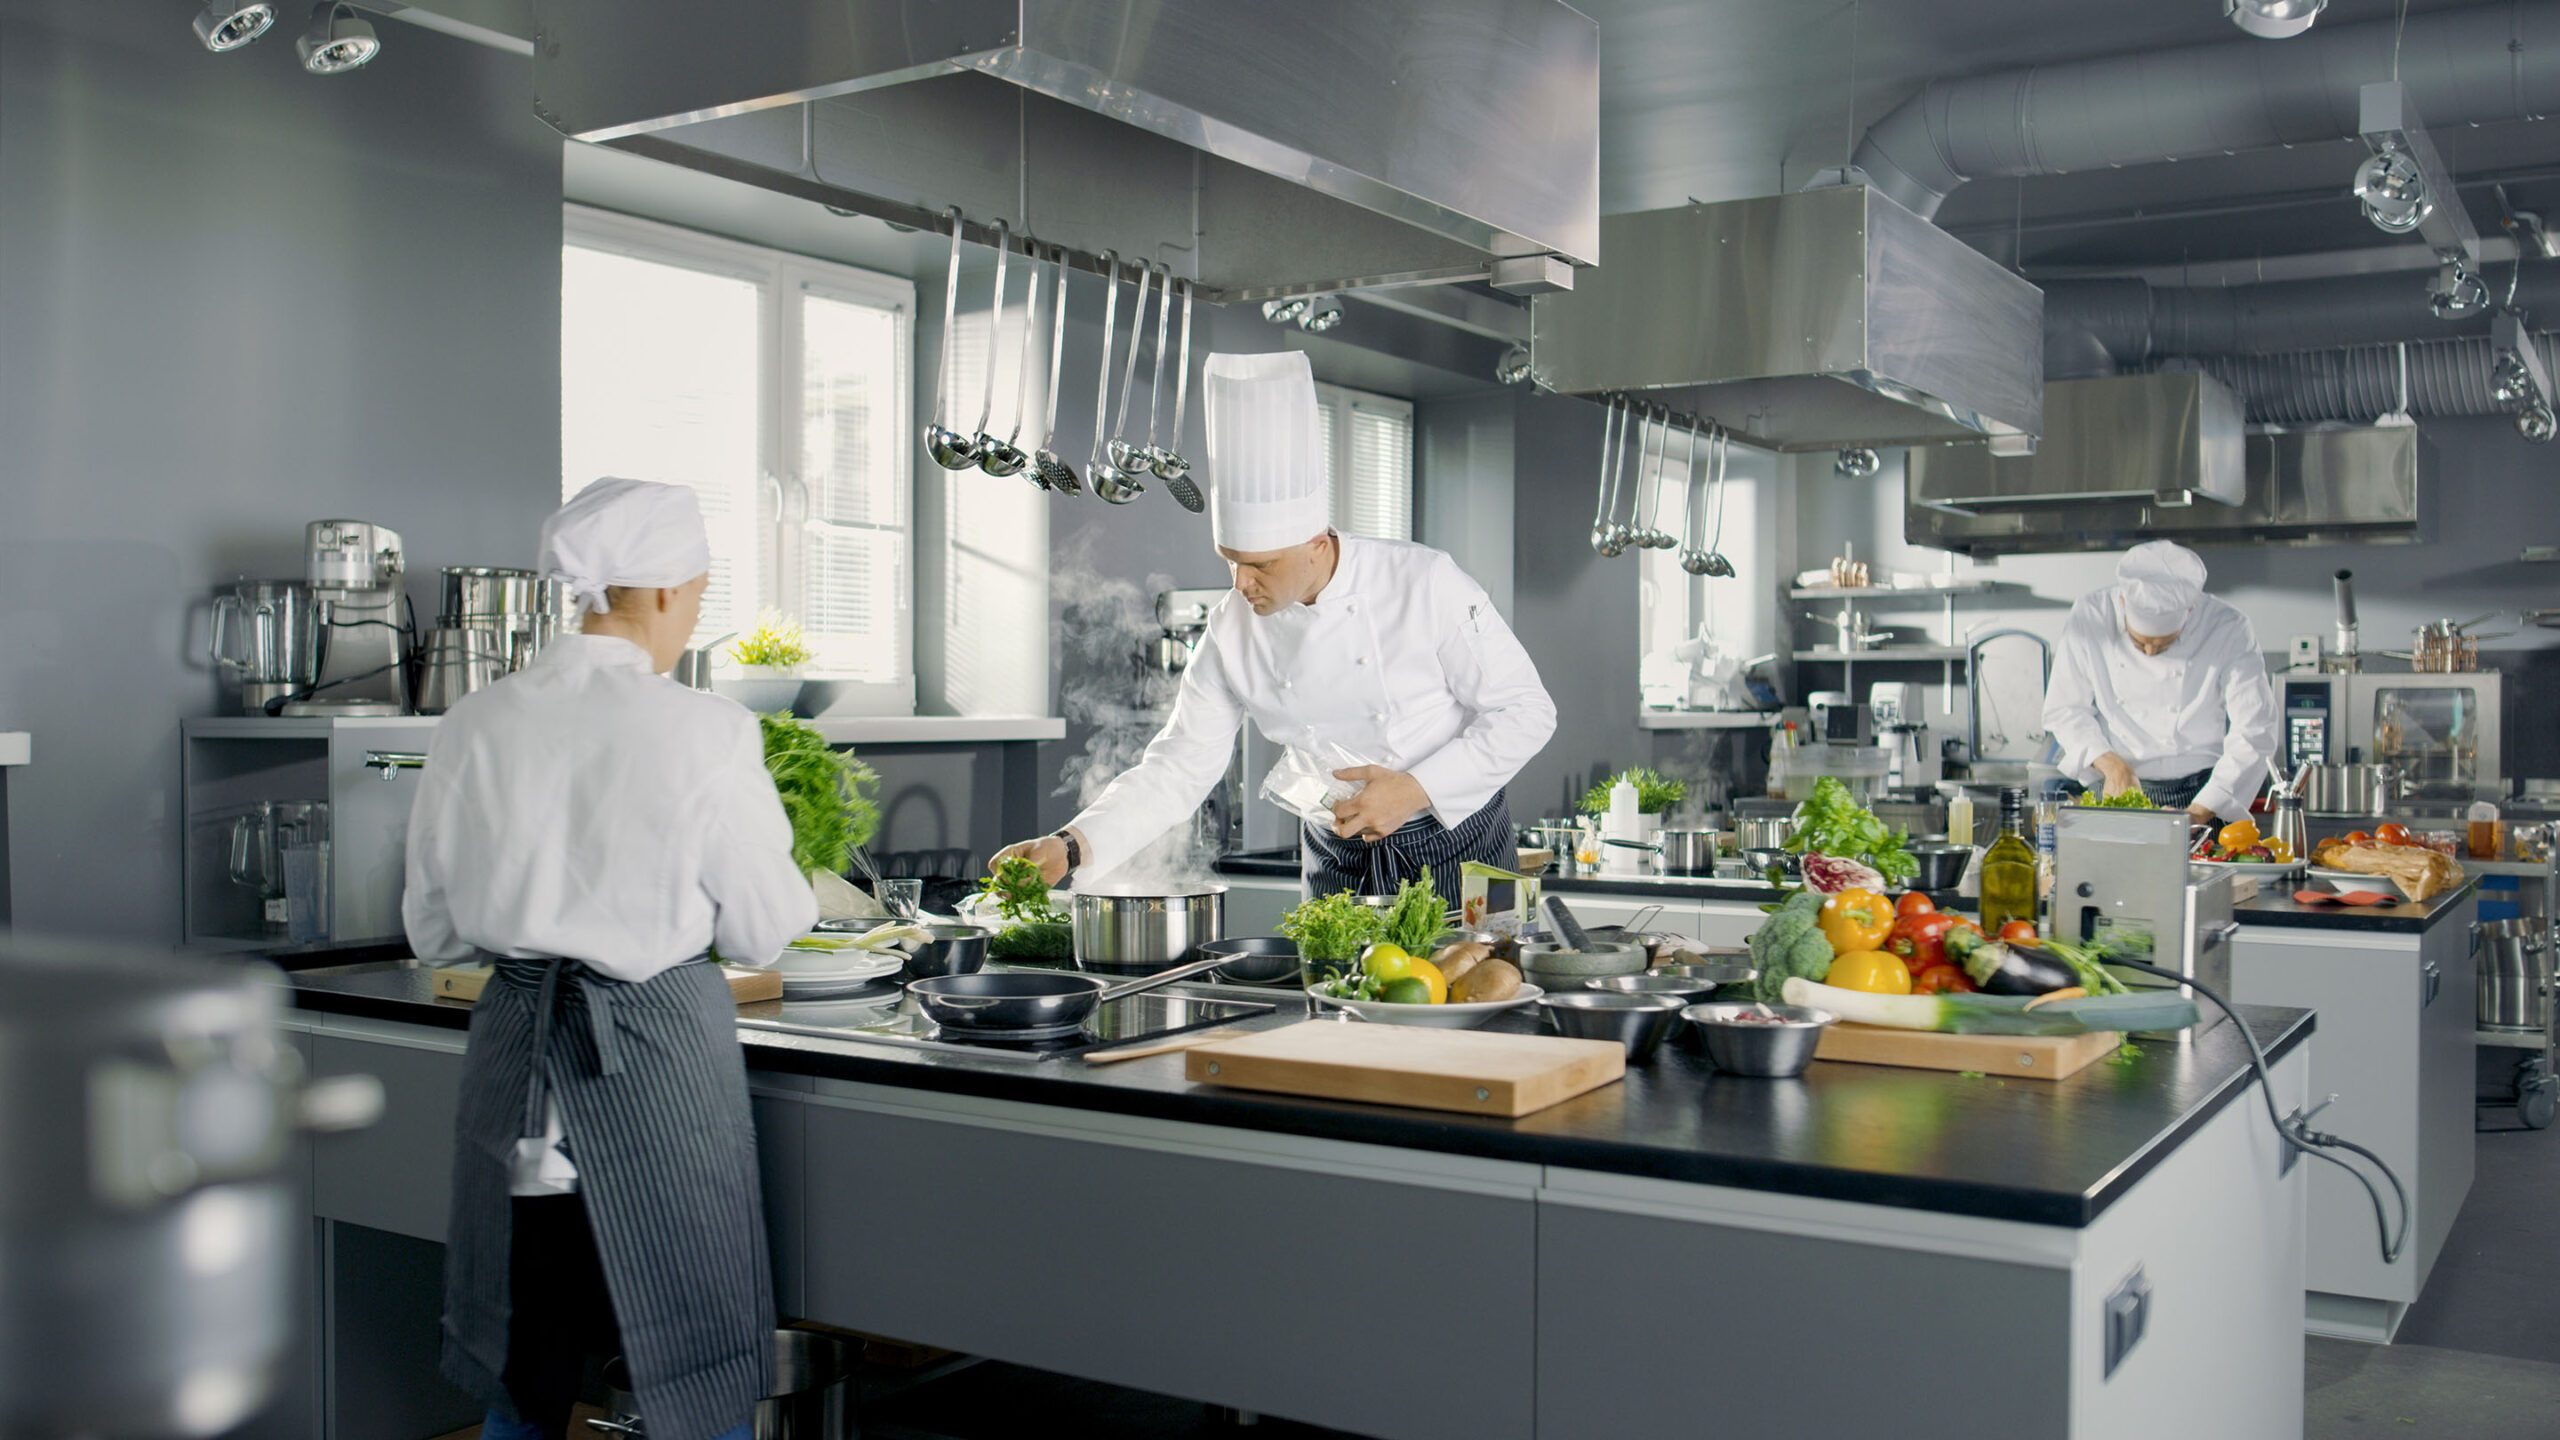 Plate Warming Solutions That Fit In Small Foodservice Spaces